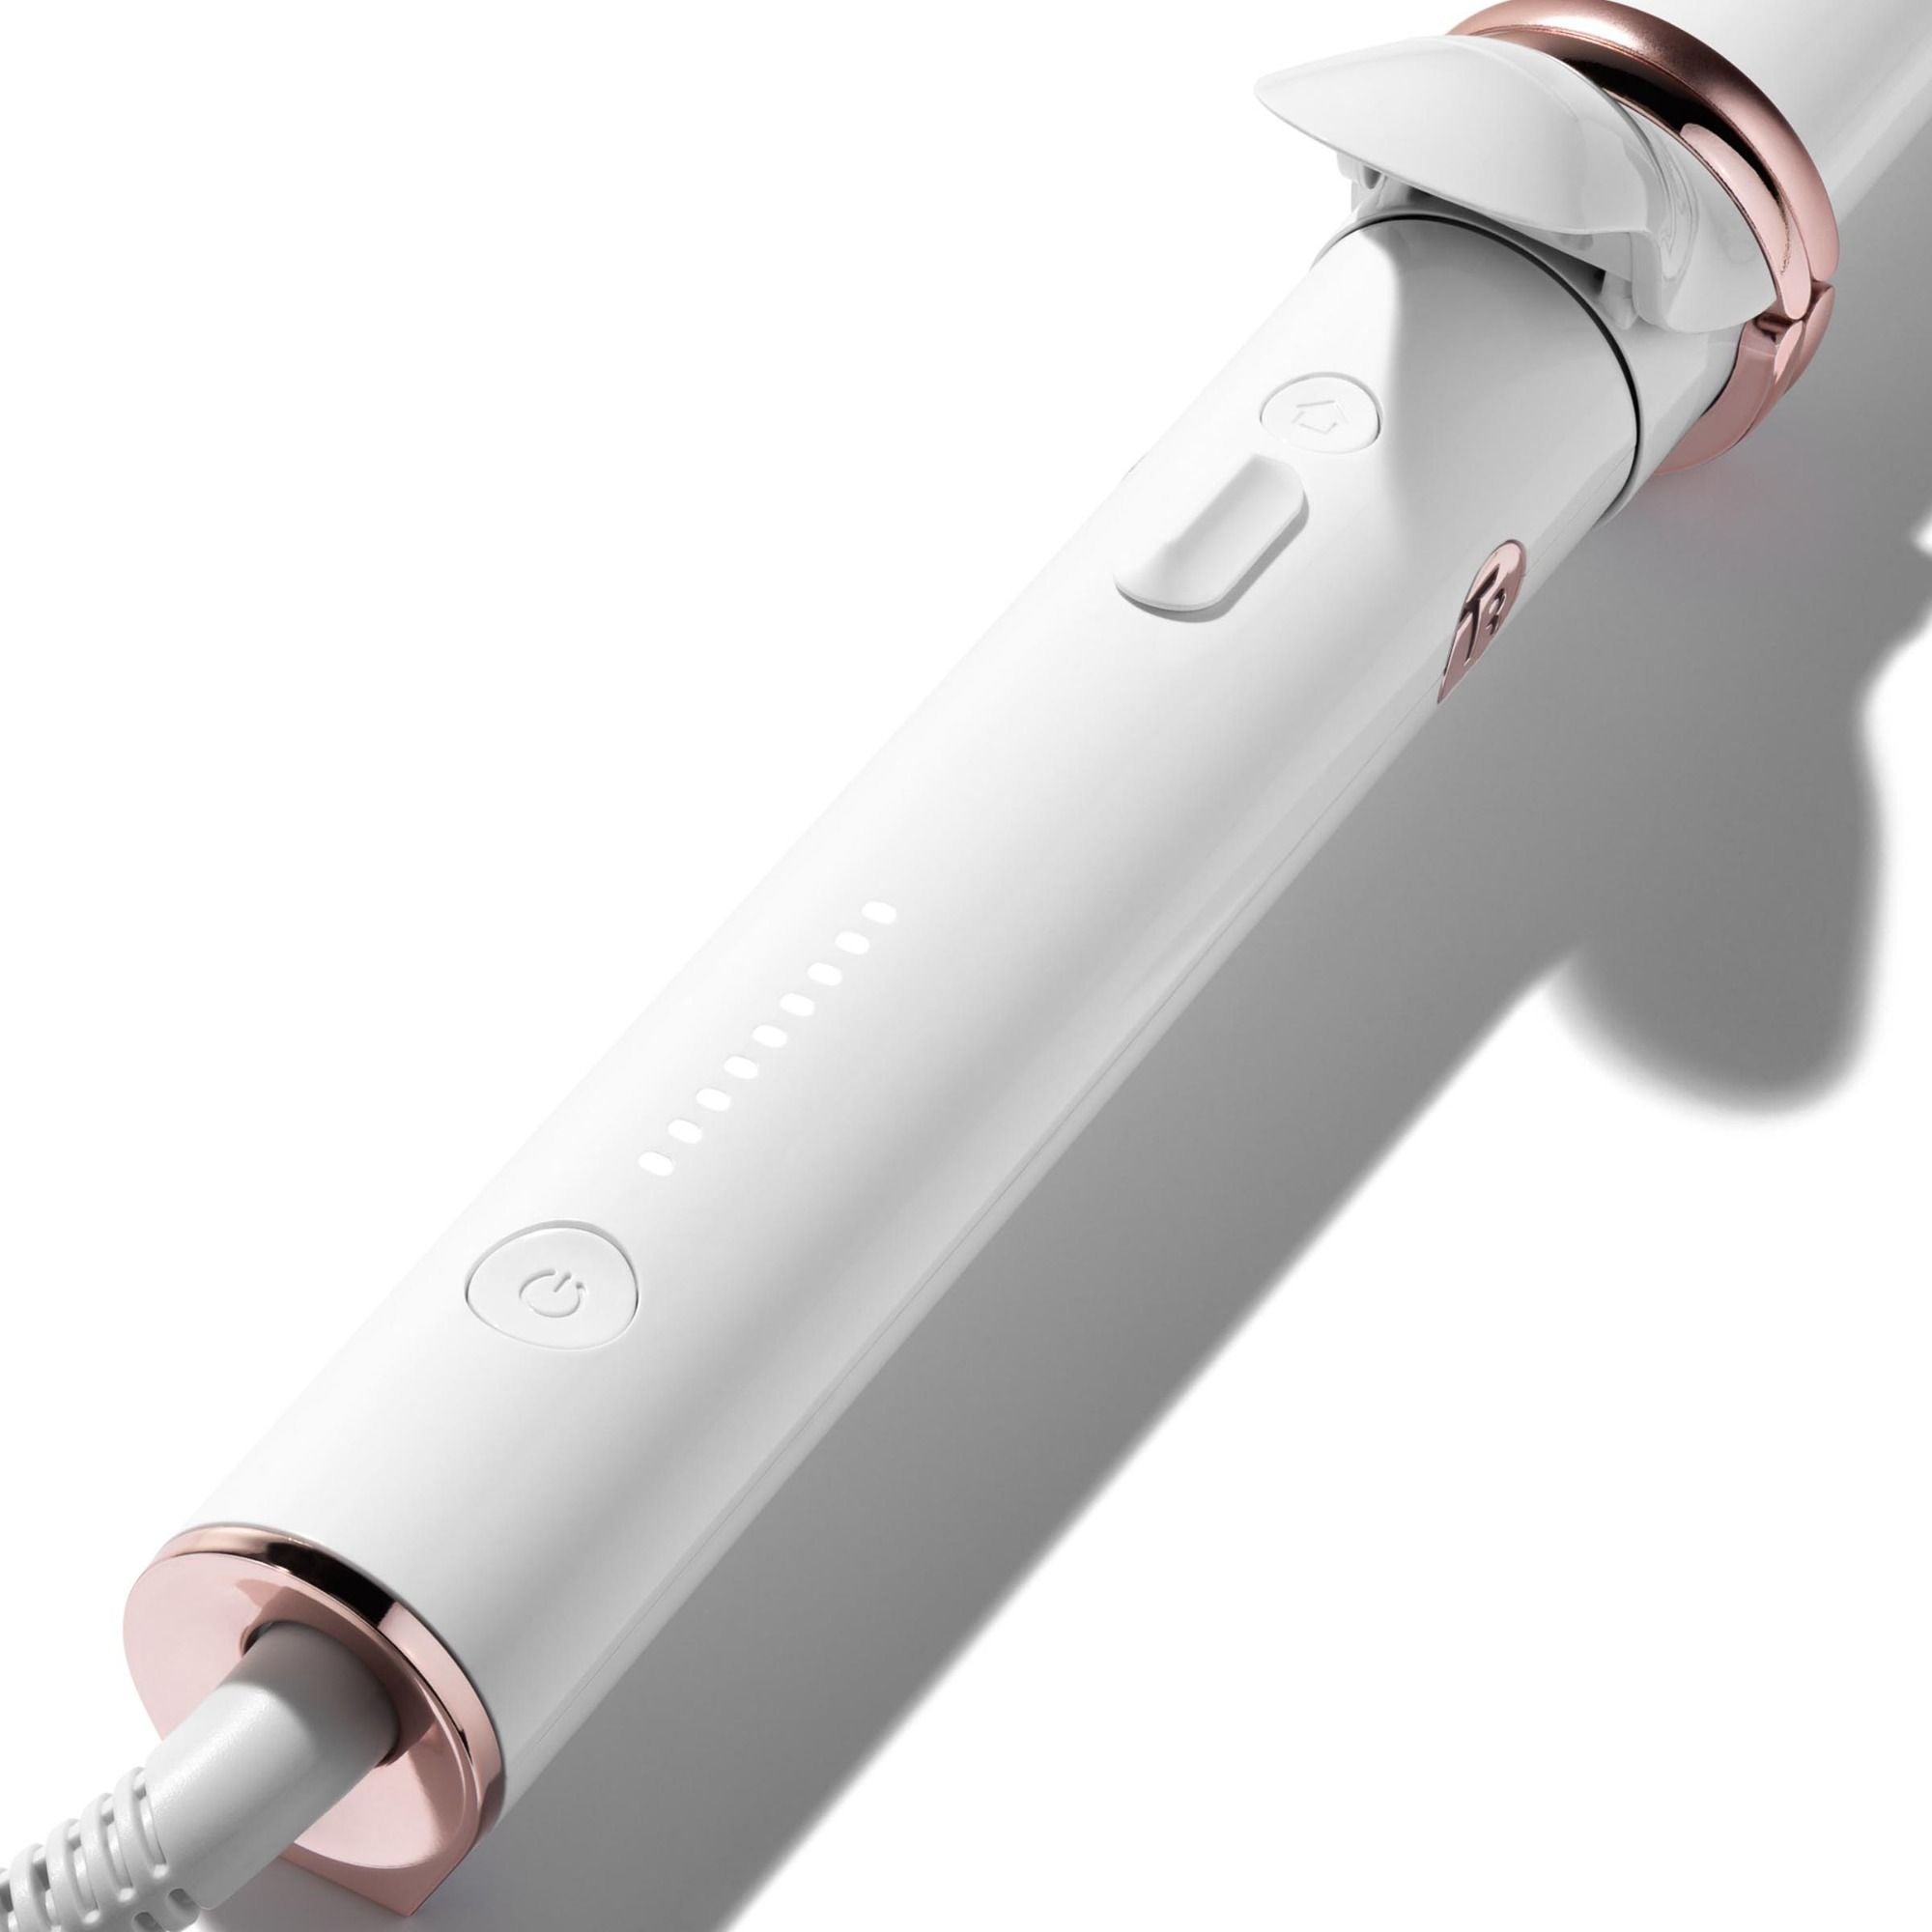 T3 Curl Wrap 1.25" Automatic Rotating Curling Iron with Long Barrel / 1.25"